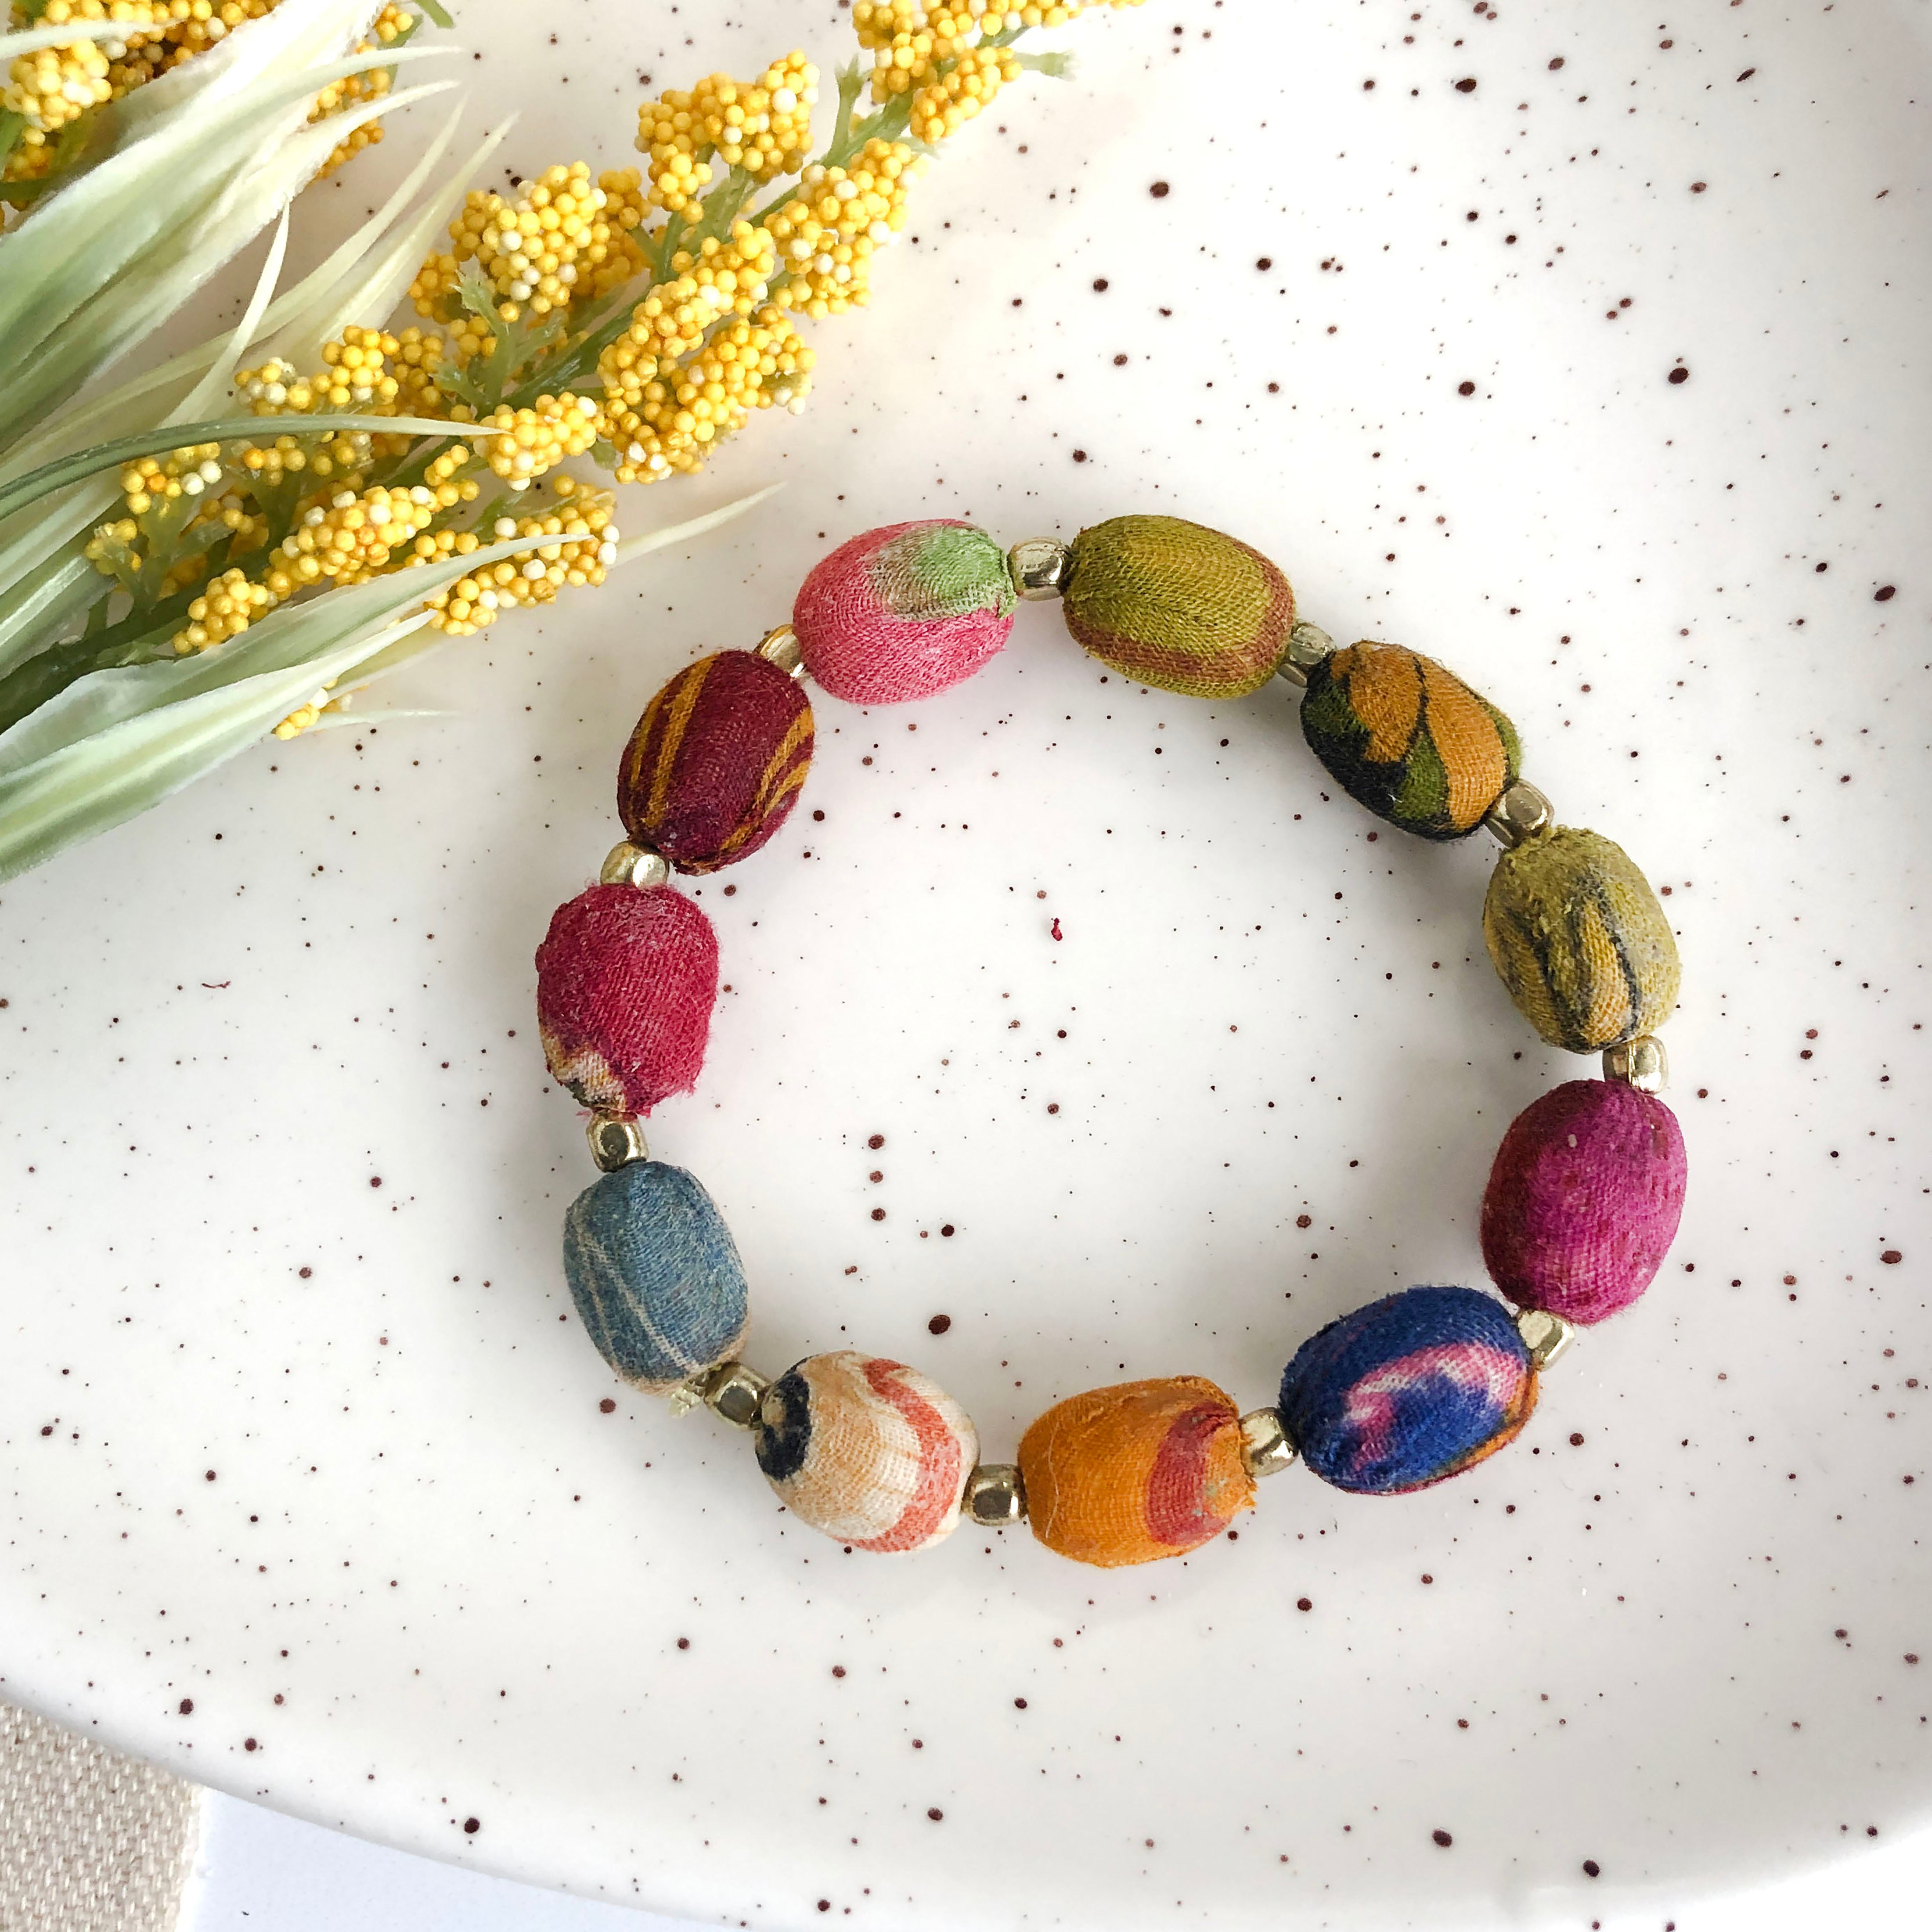 A colorful strand of textile-wrapped oblong beads alternates with small gold beads to create a bracelet.